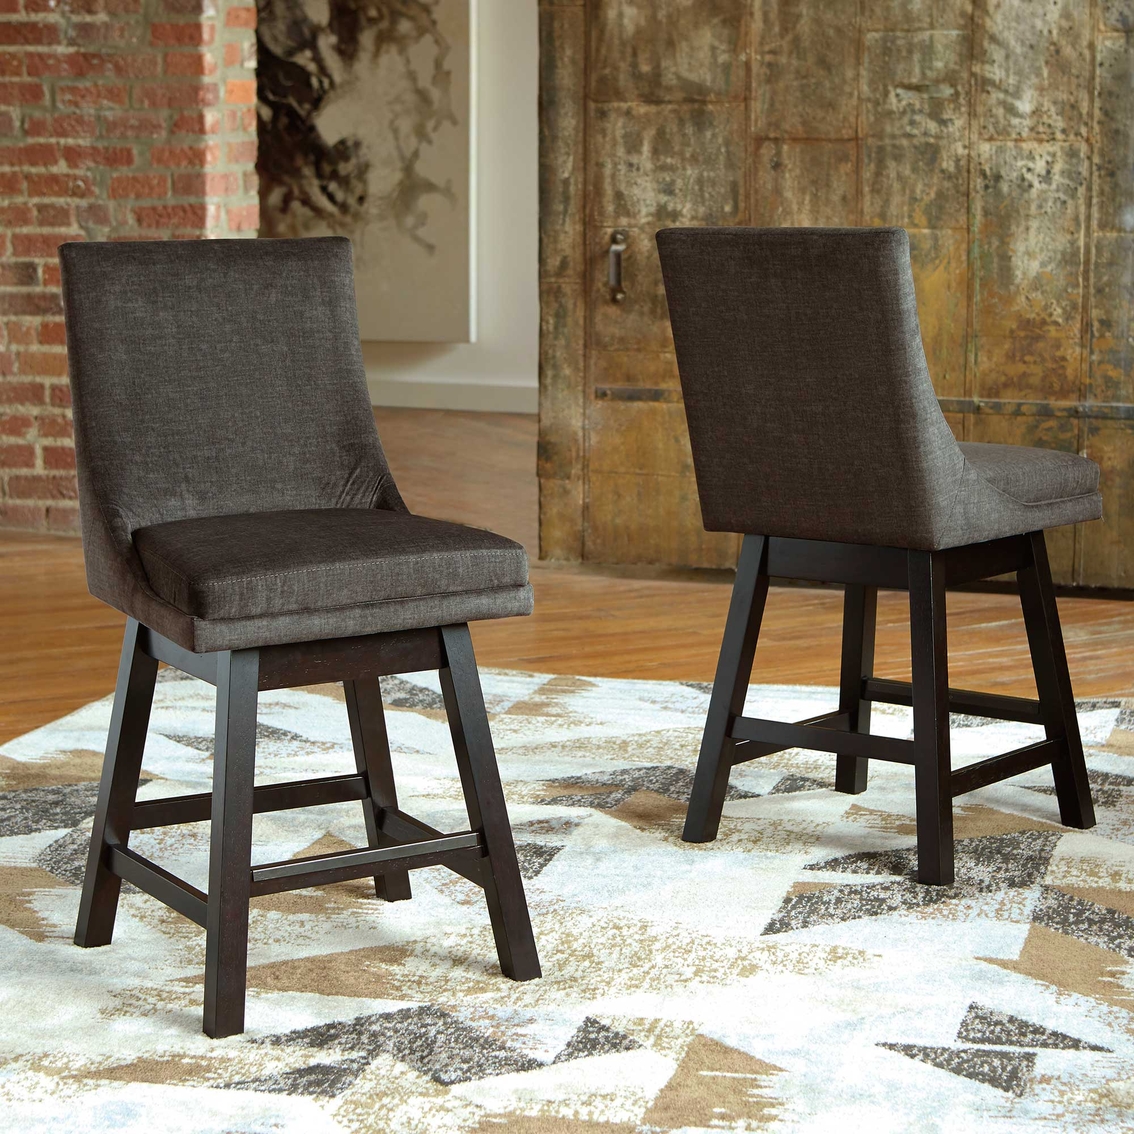 Signature Design by Ashley Tallenger Upholstered Swivel Counter Stool 2 pk. - Image 2 of 6